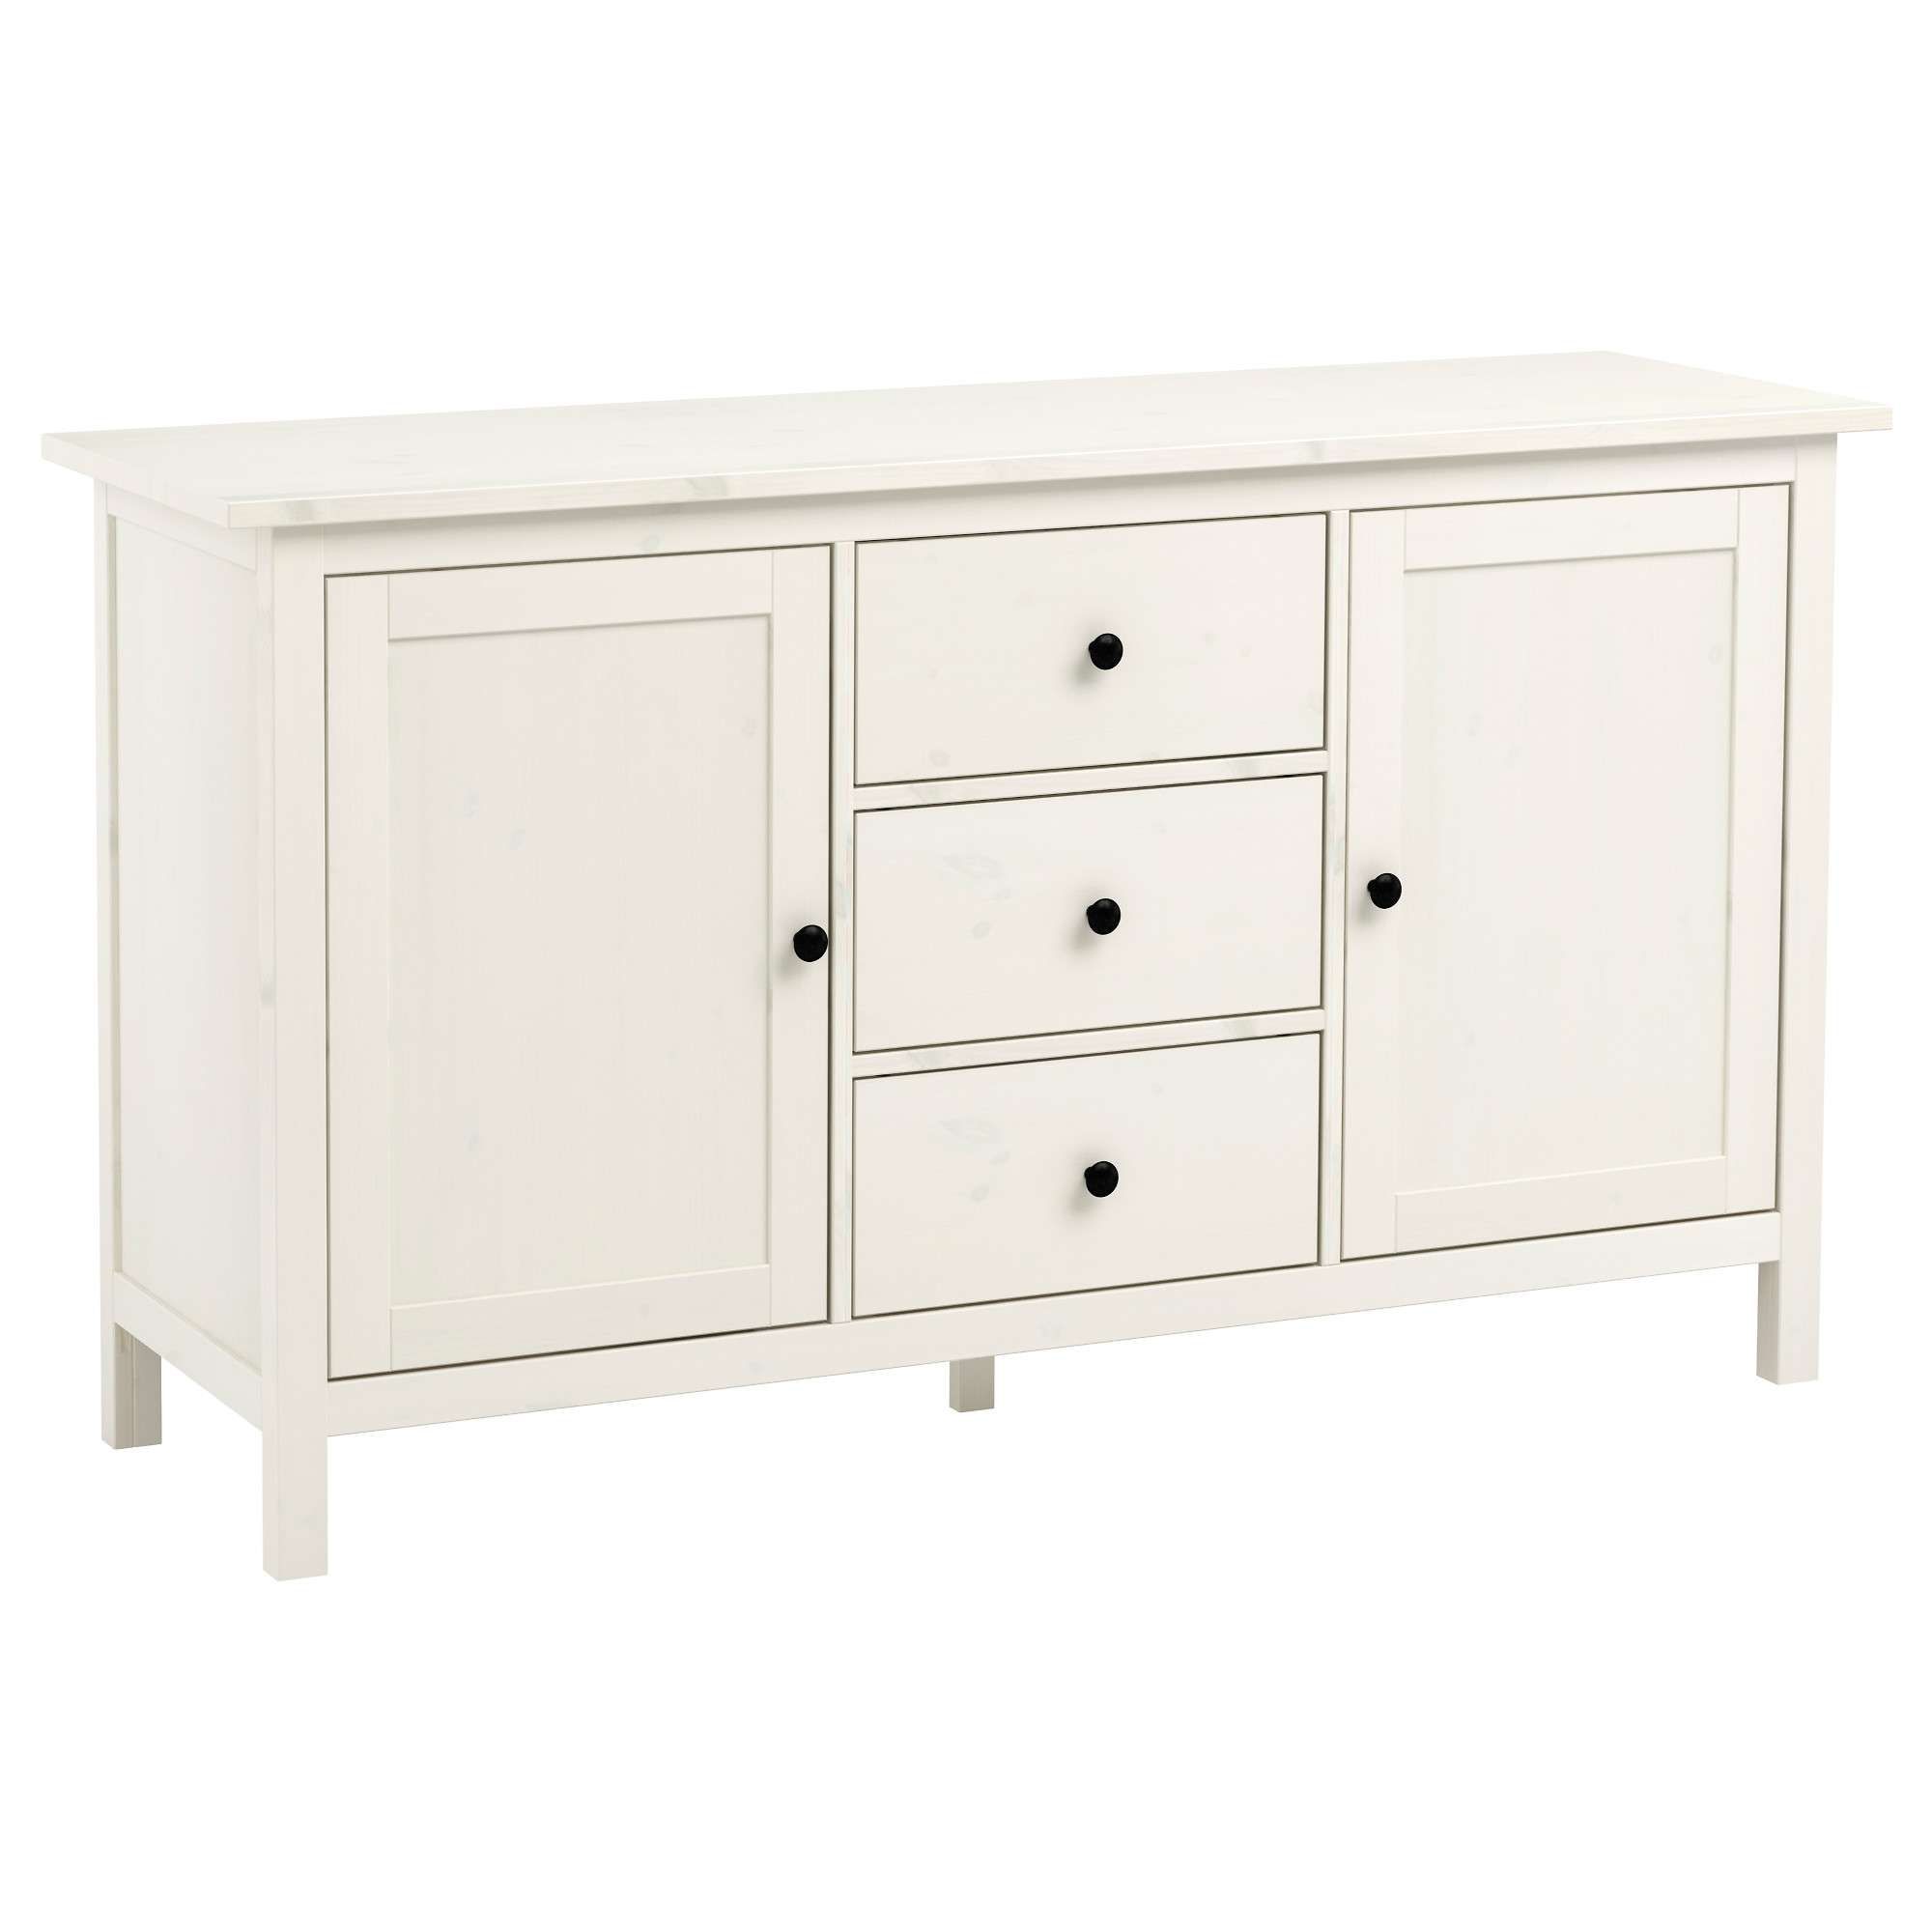 Hemnes Sideboard White Stain 157x88 Cm – Ikea With Regard To Sideboards Tables (View 1 of 20)